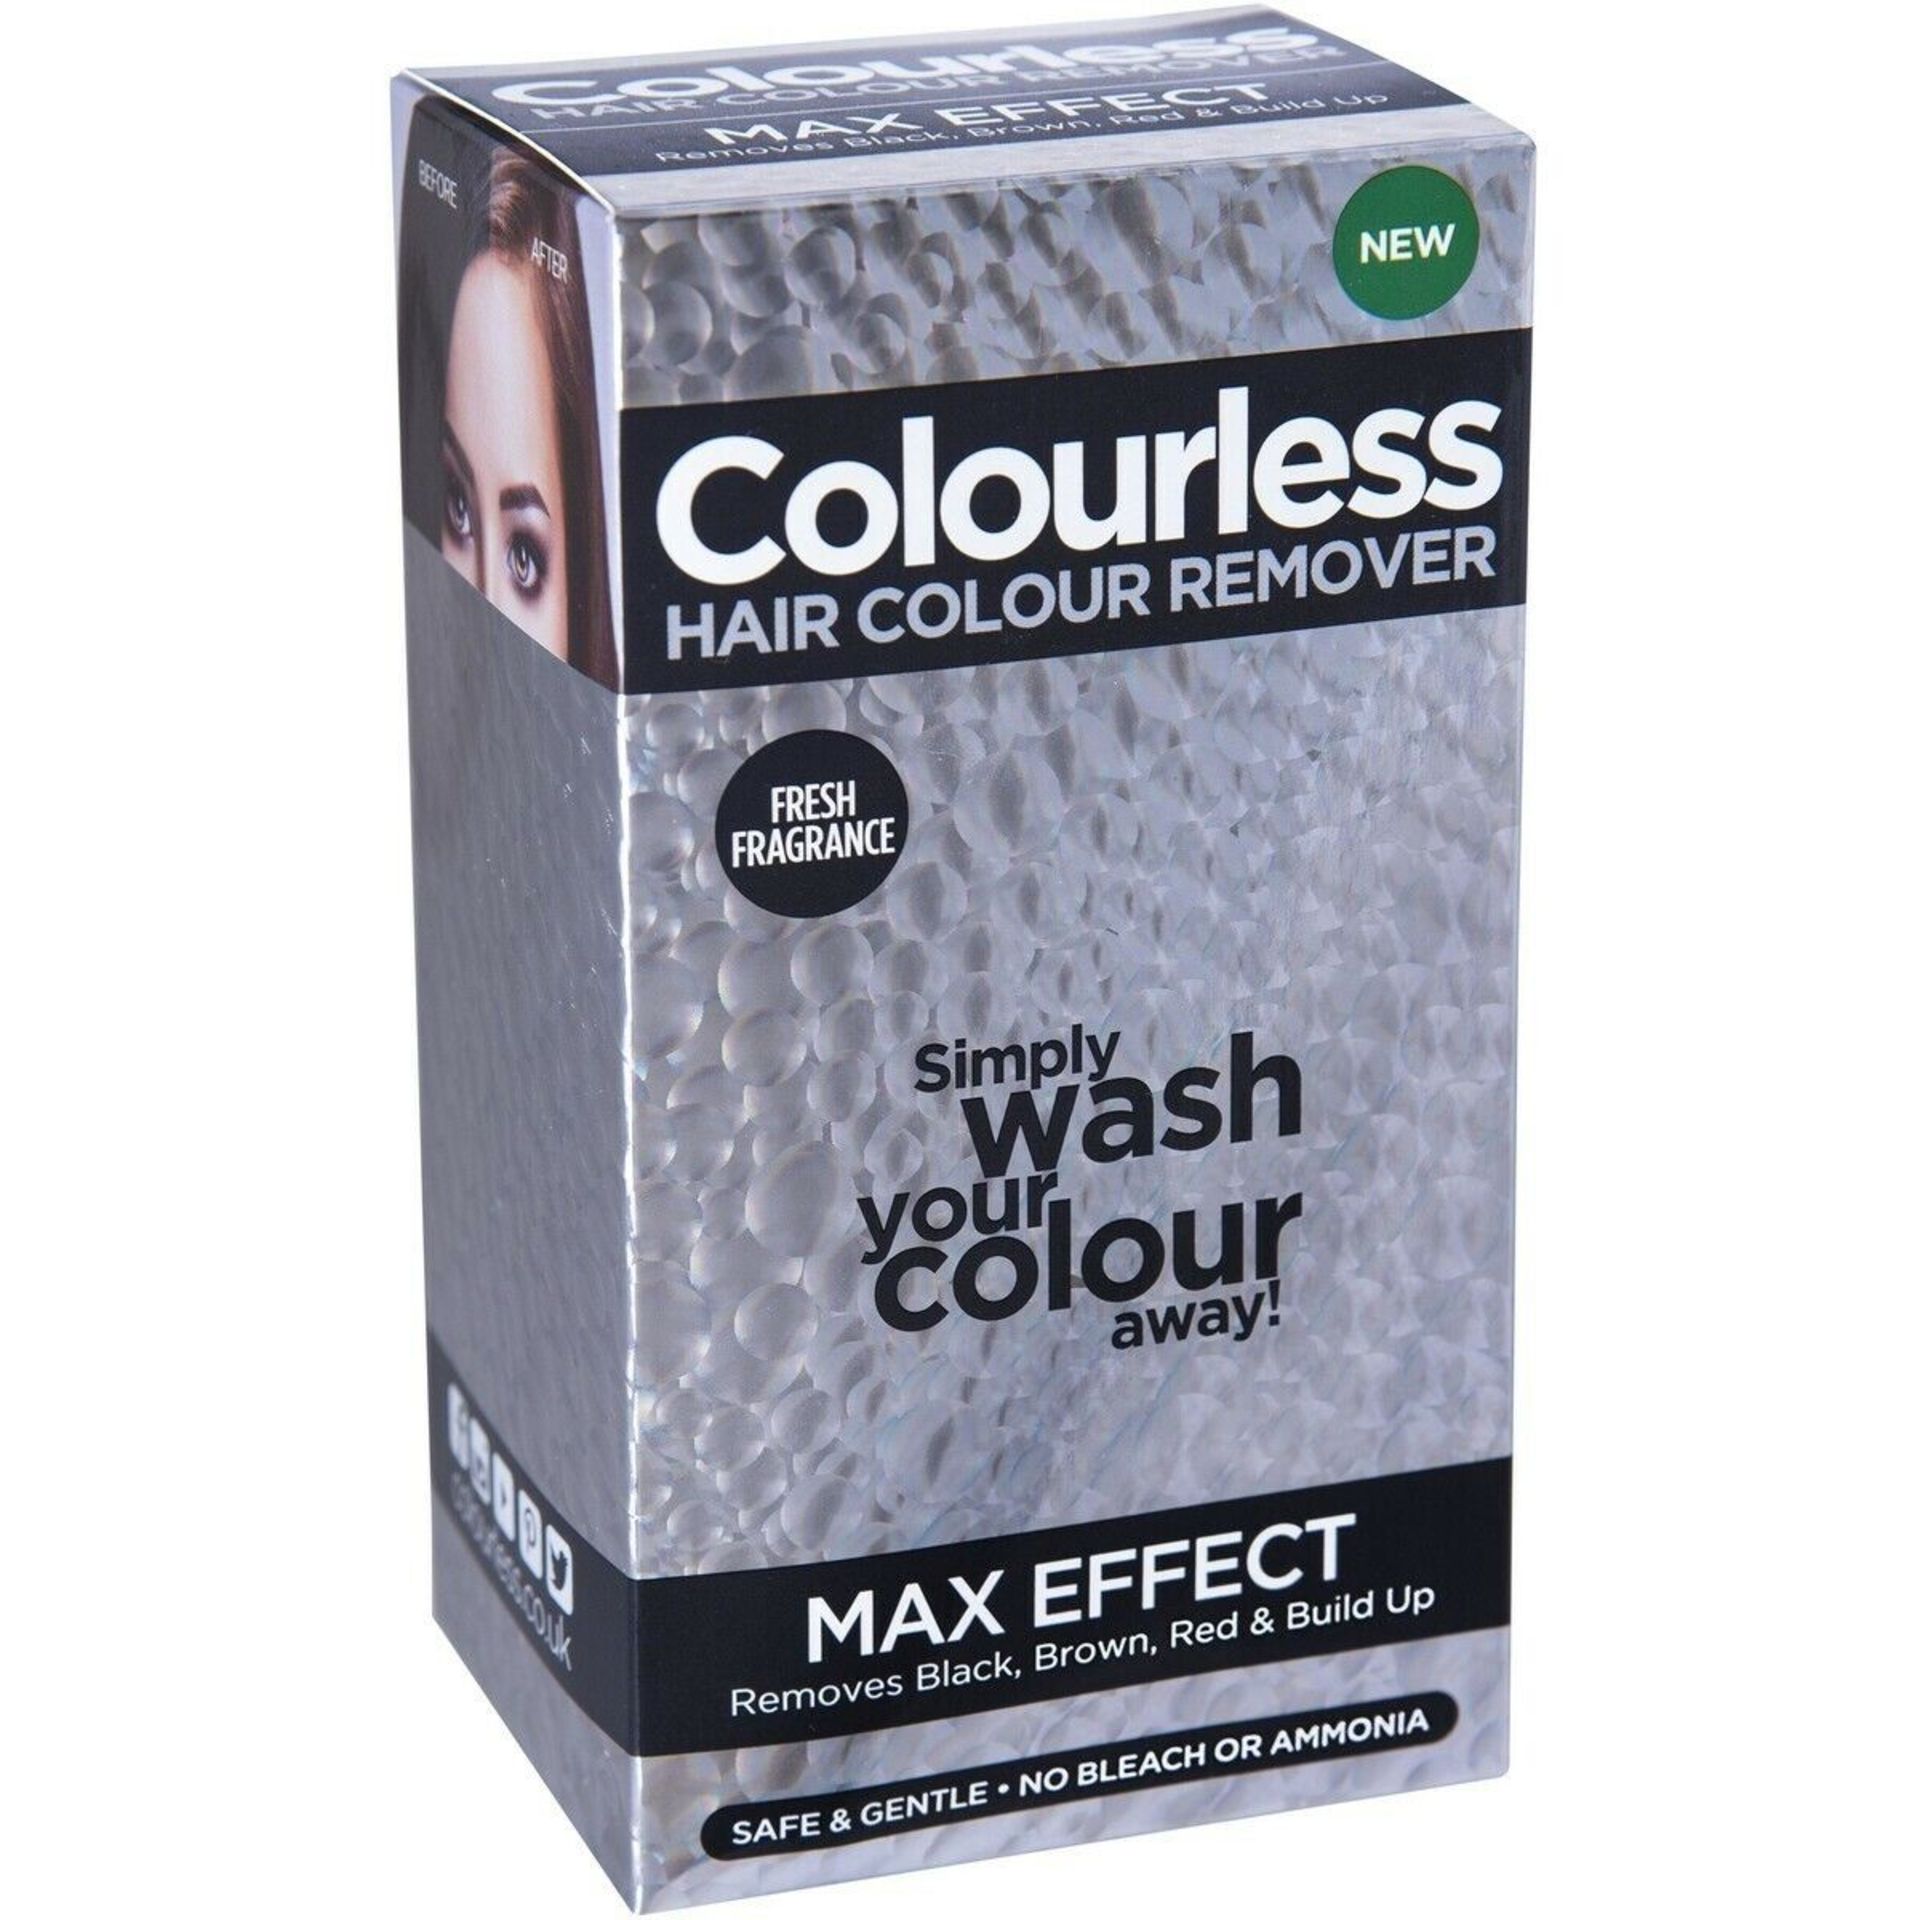 36 x Revolution London Colourless Max Effect Hair Colour Remover - Image 2 of 7